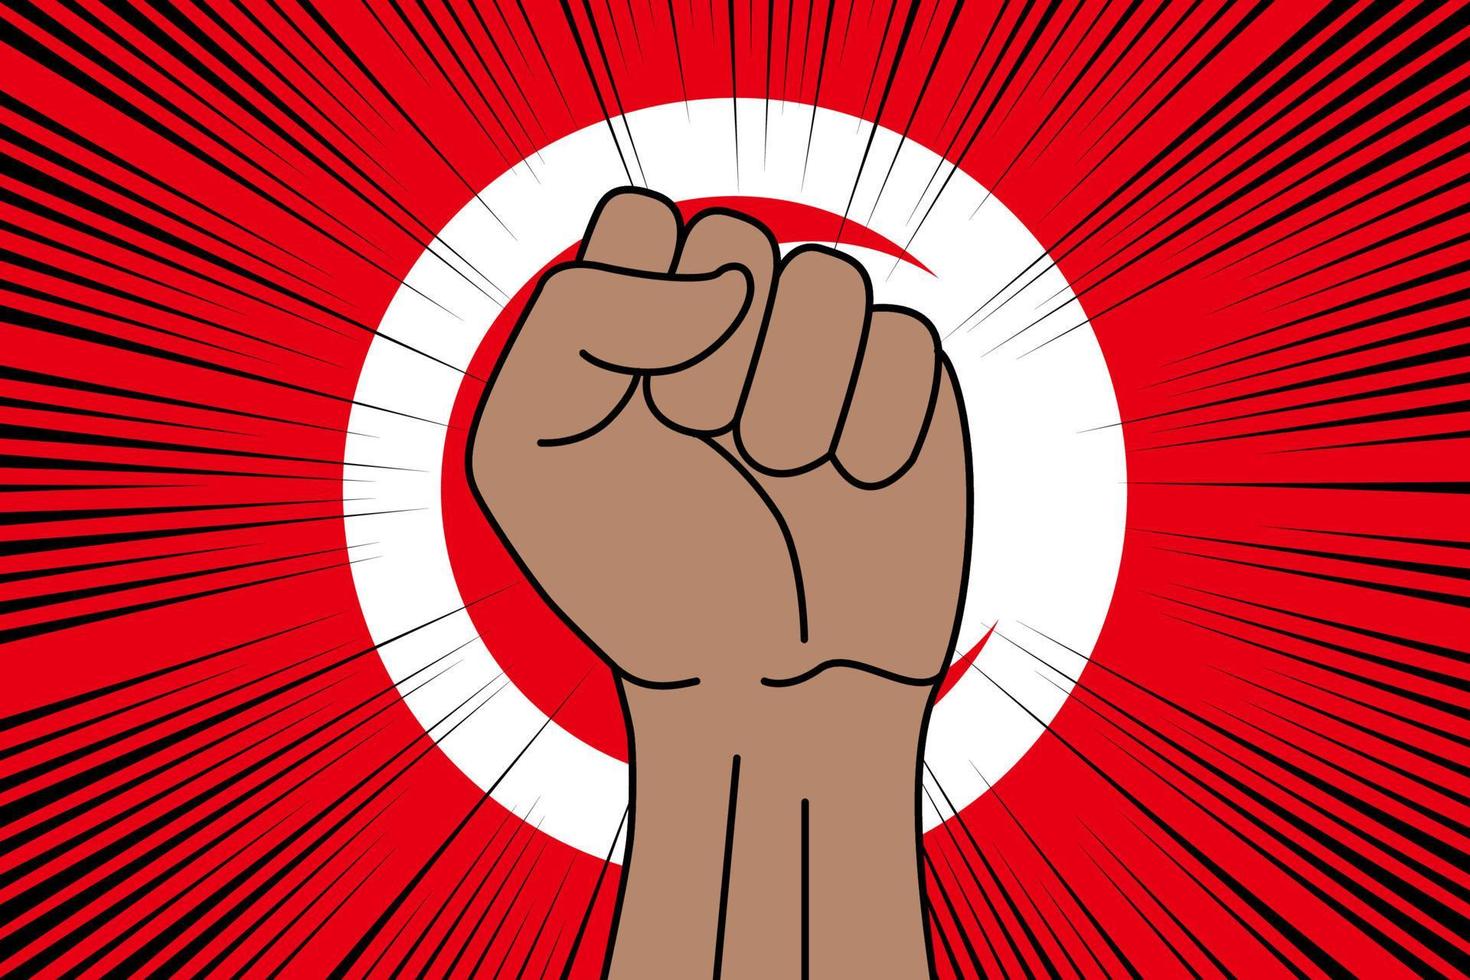 Human fist clenched symbol on flag of Tunisia vector